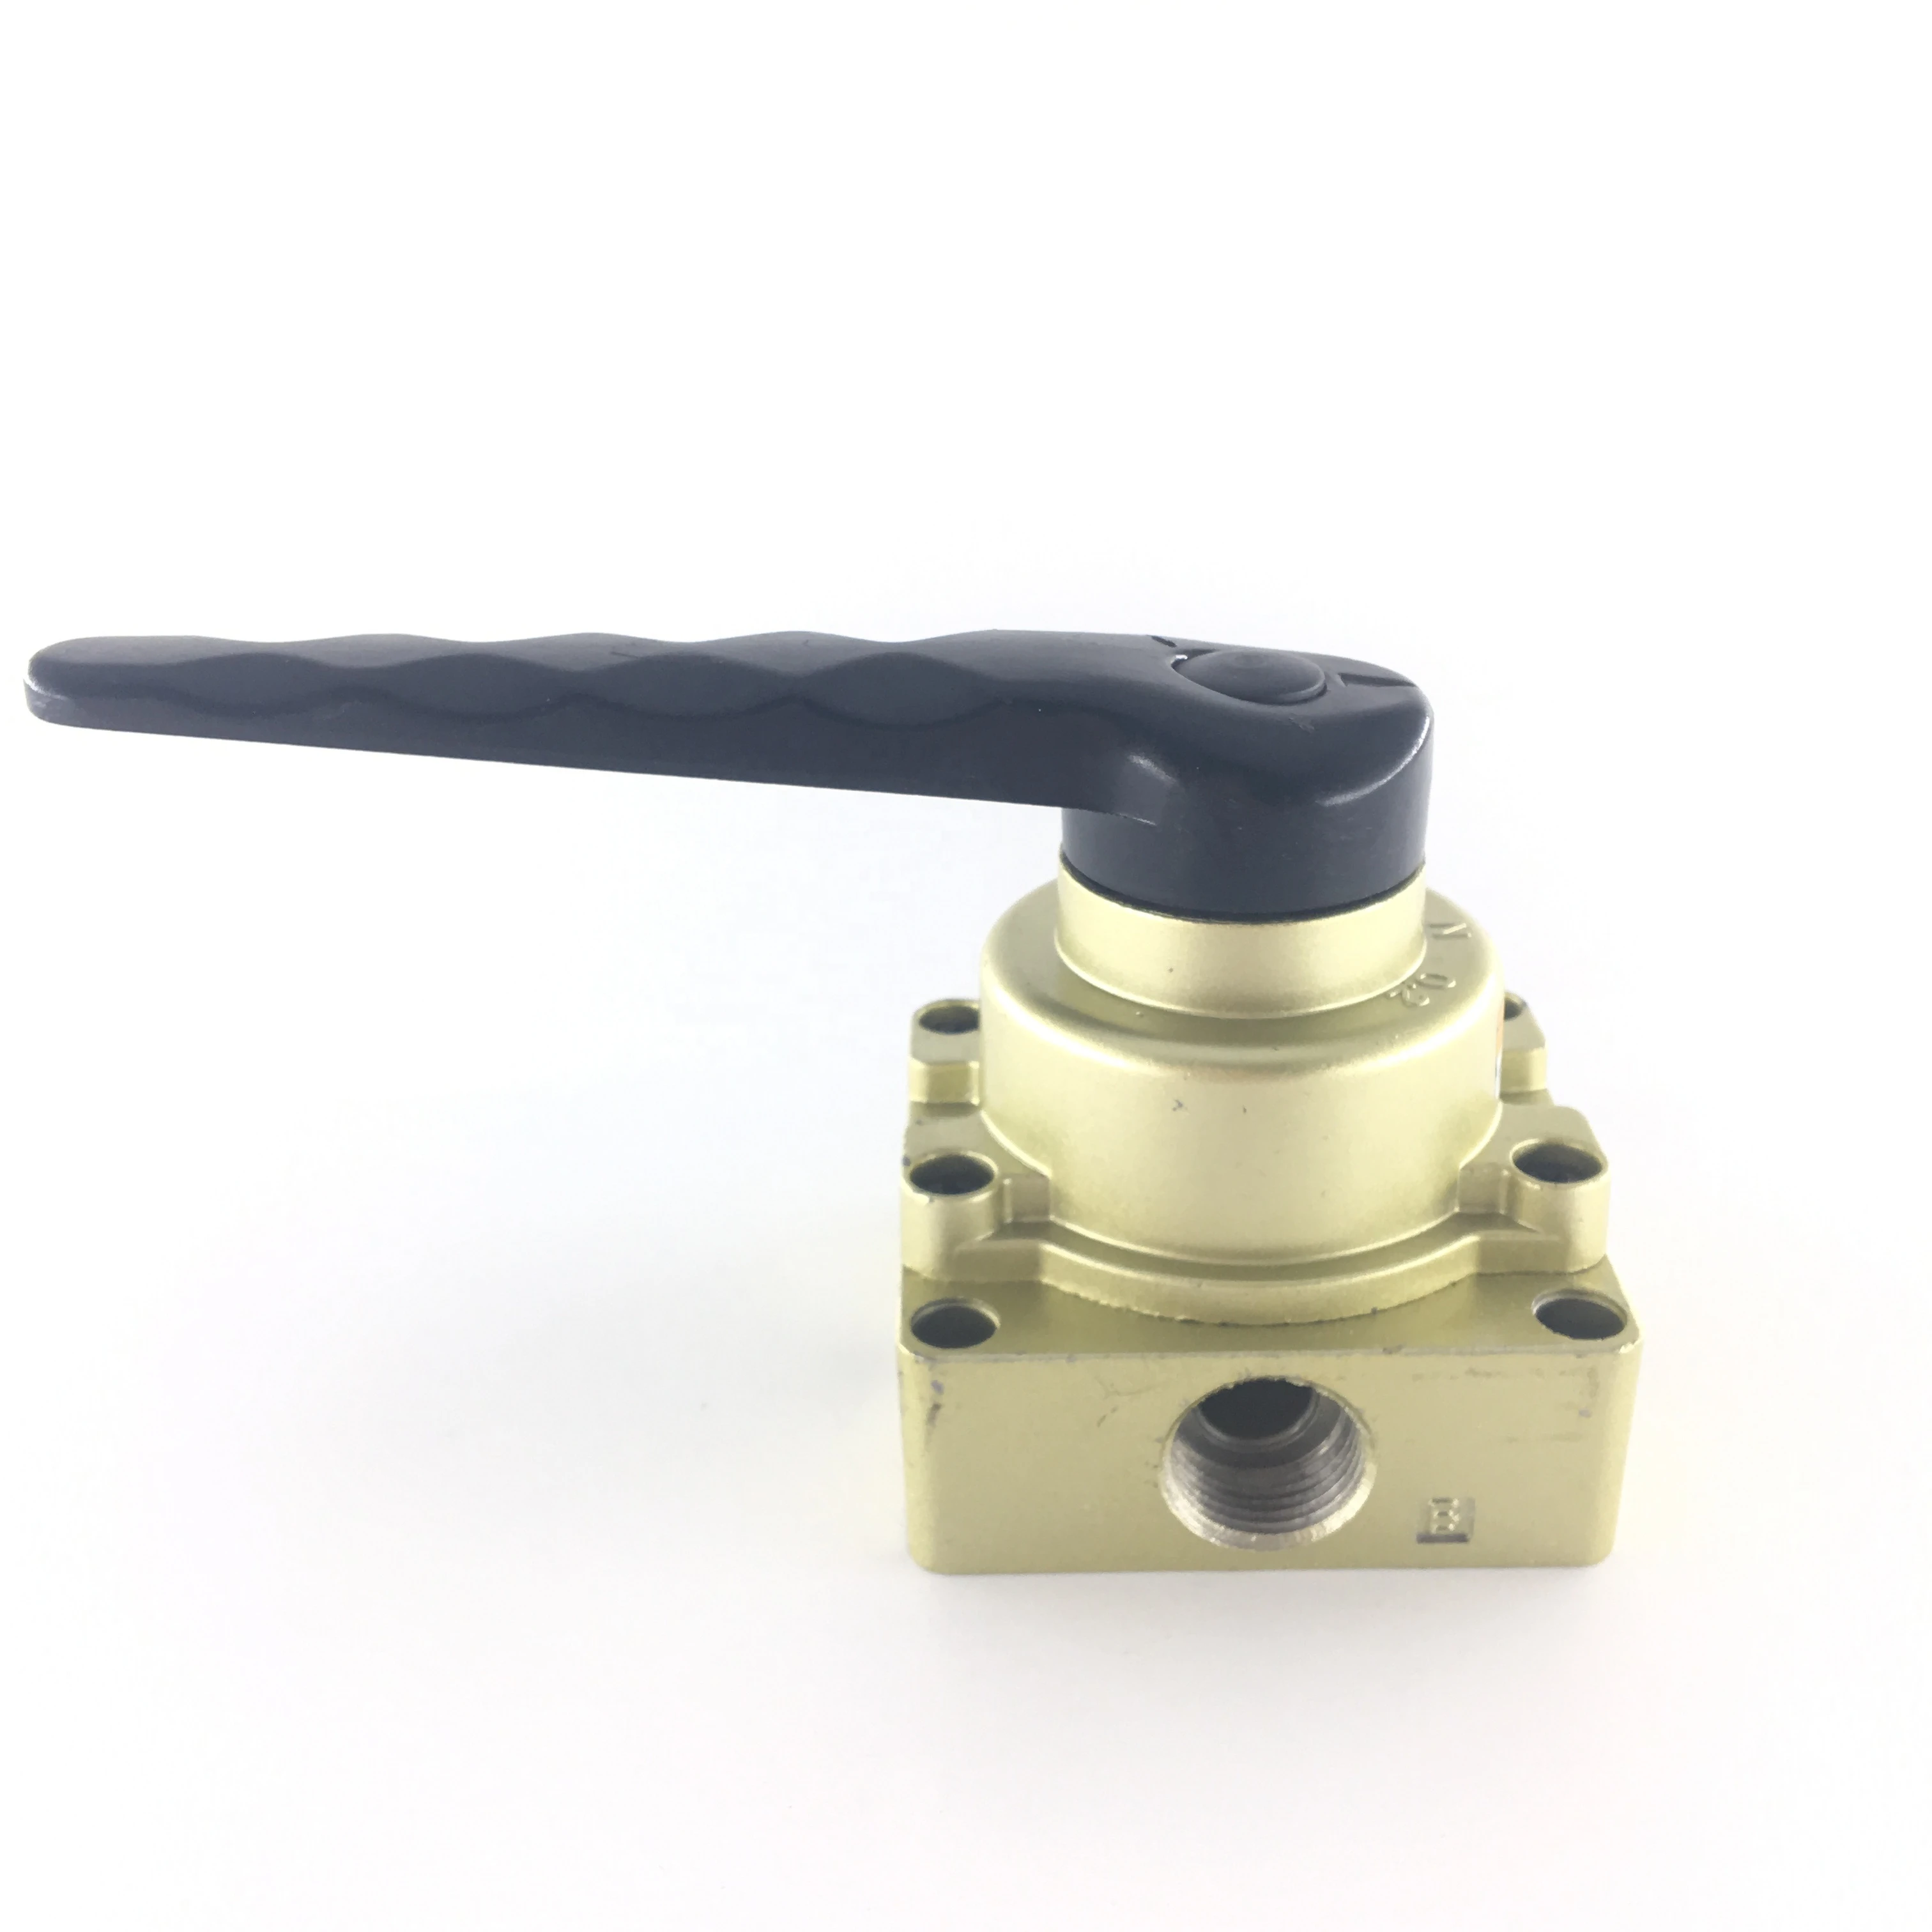 Airtac Type HV series pneumatic mechanical hand switching valve